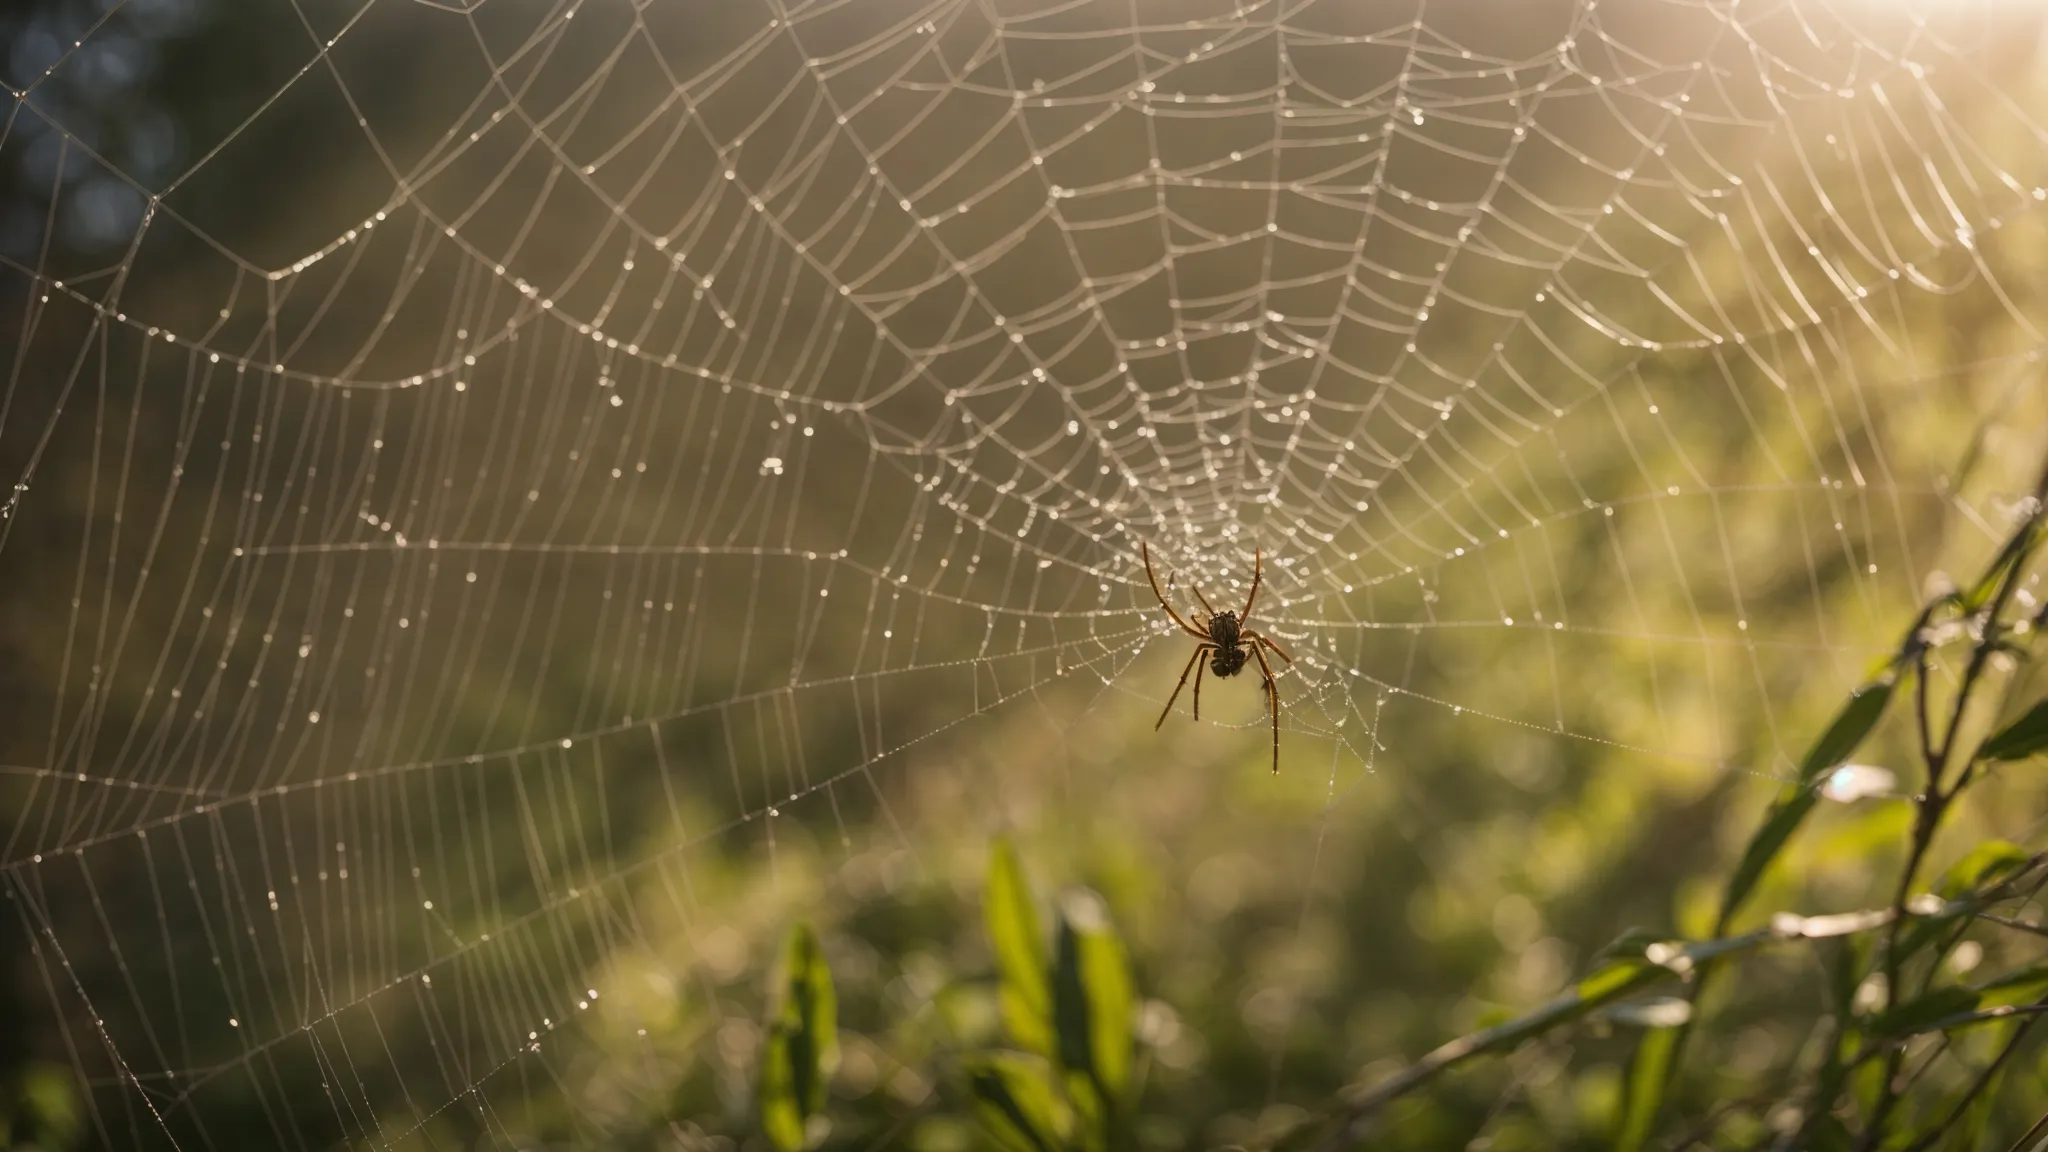 a close-up view of a spider weaving an intricate web in the morning light.